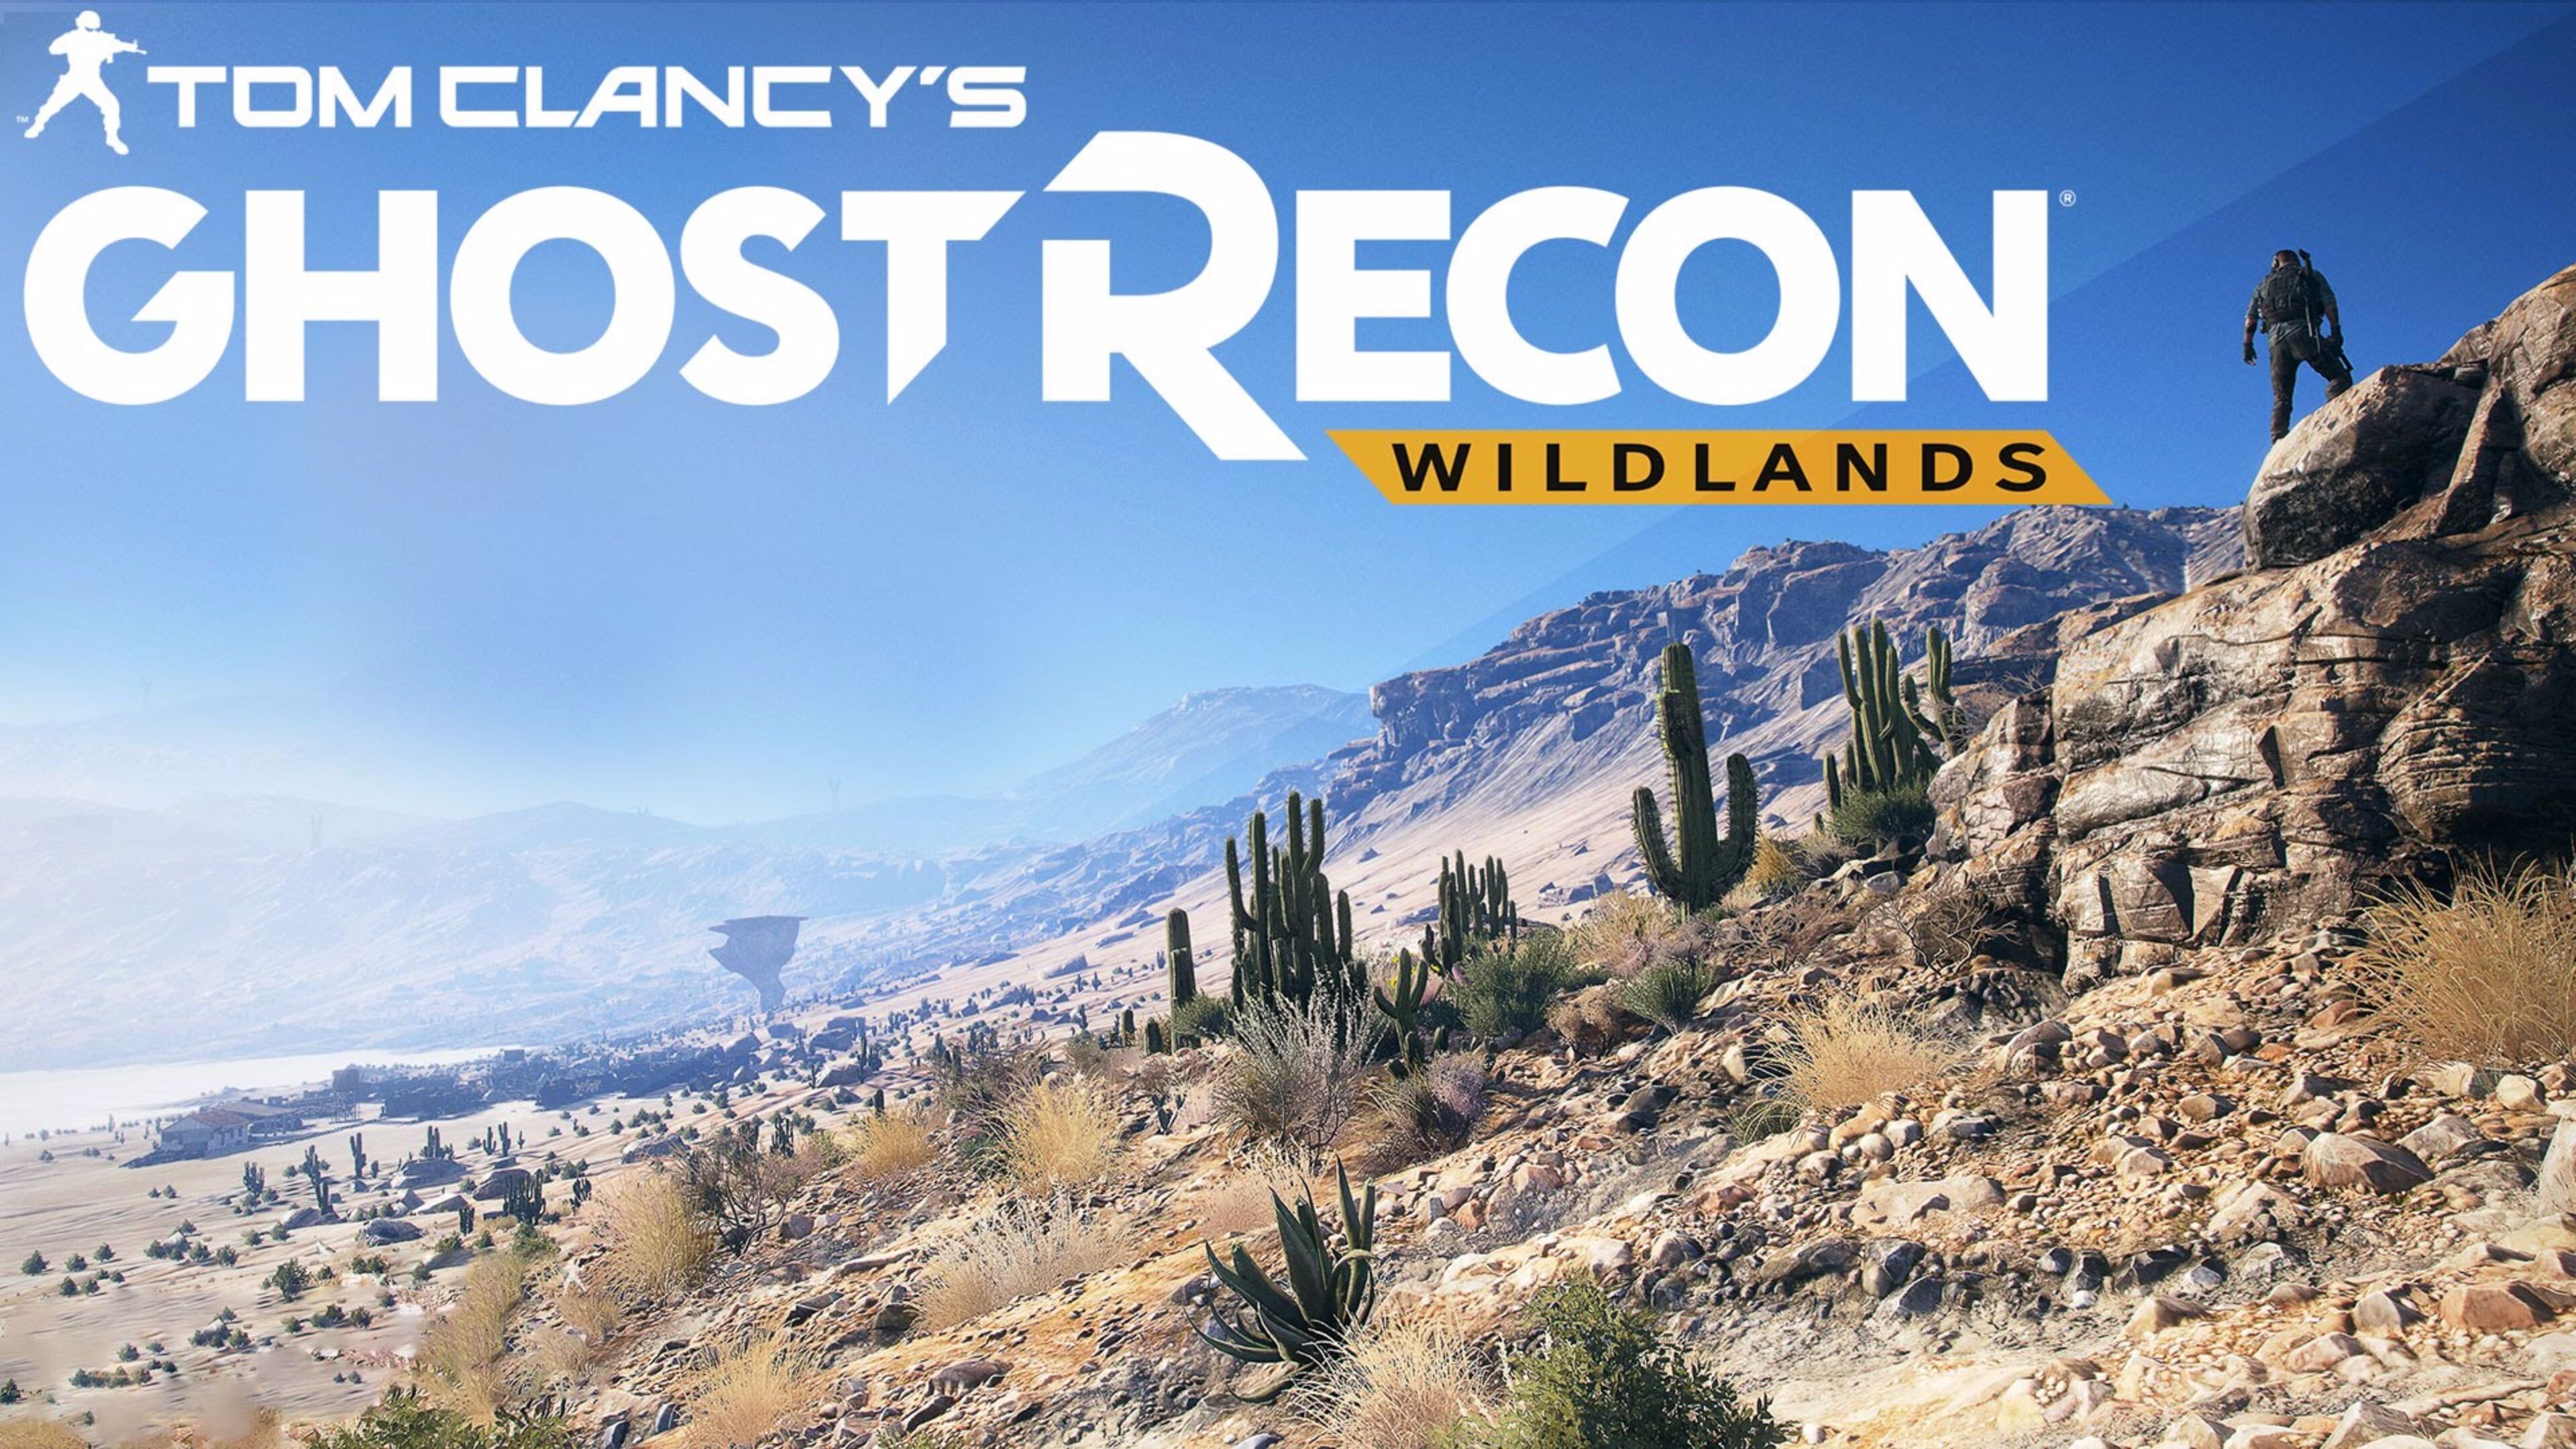 Ghost Recon: Wildlands: A tactical cover based shooter game set in an open world environment and played from a third-person perspective. 3840x2160 4K Wallpaper.